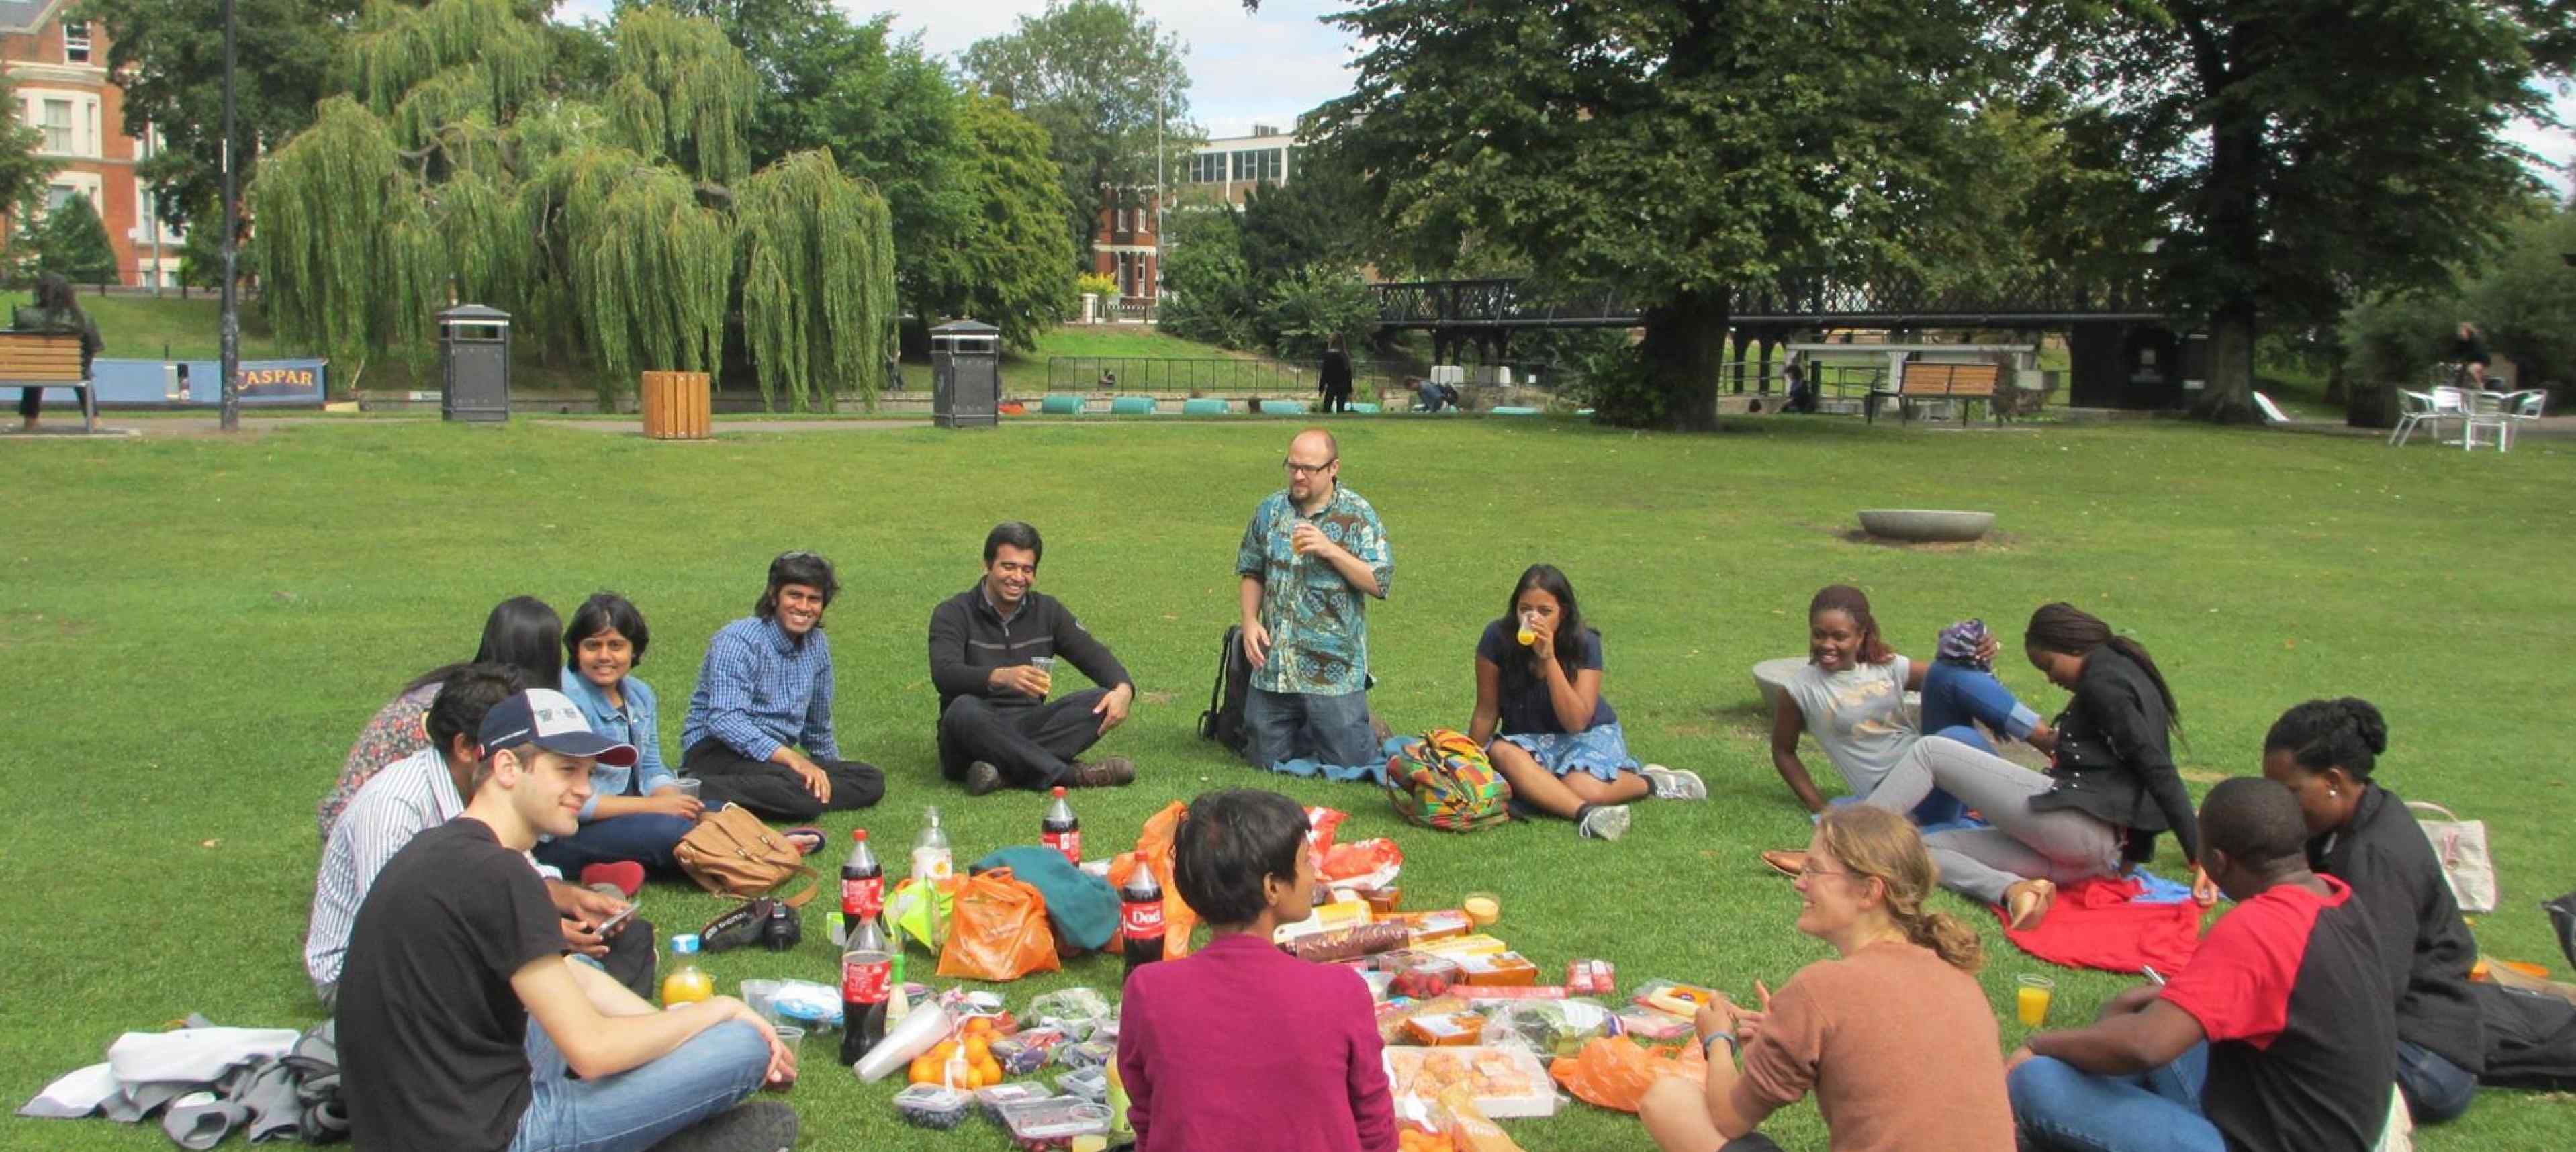 Commonwealth group having a picnic in Cambridge